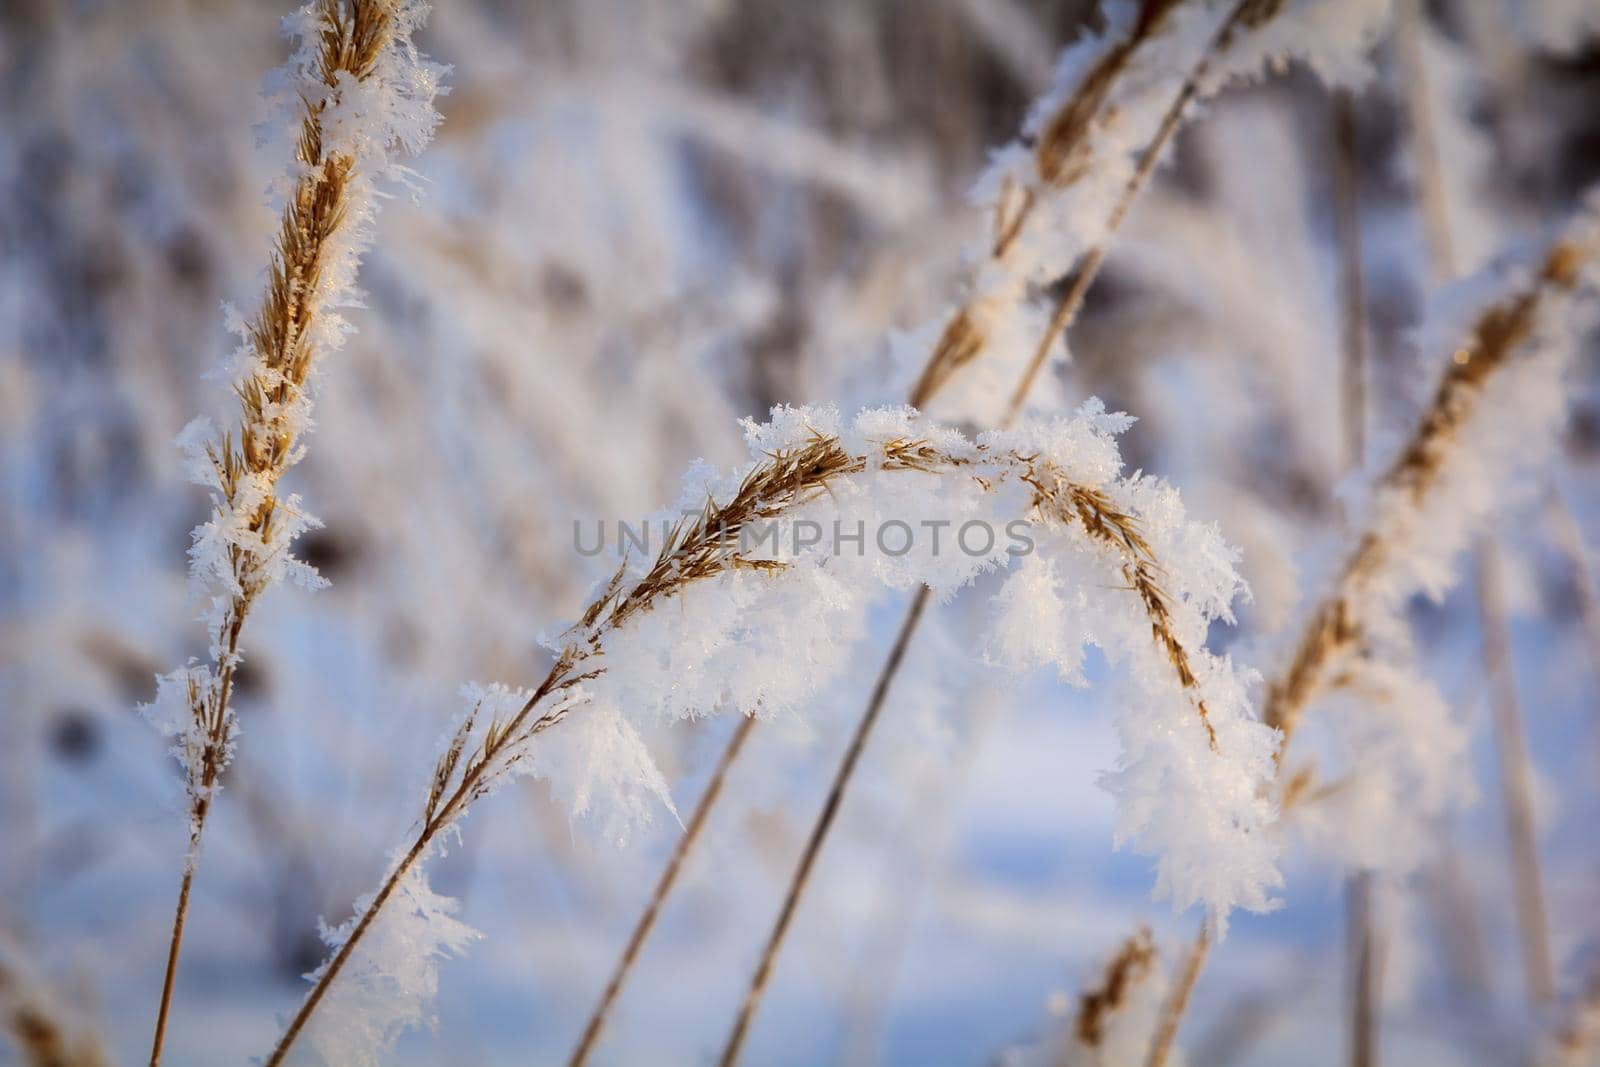 Spikelets and branches covered with frost and snowflakes in the forest, on a sunny day by Yurich32